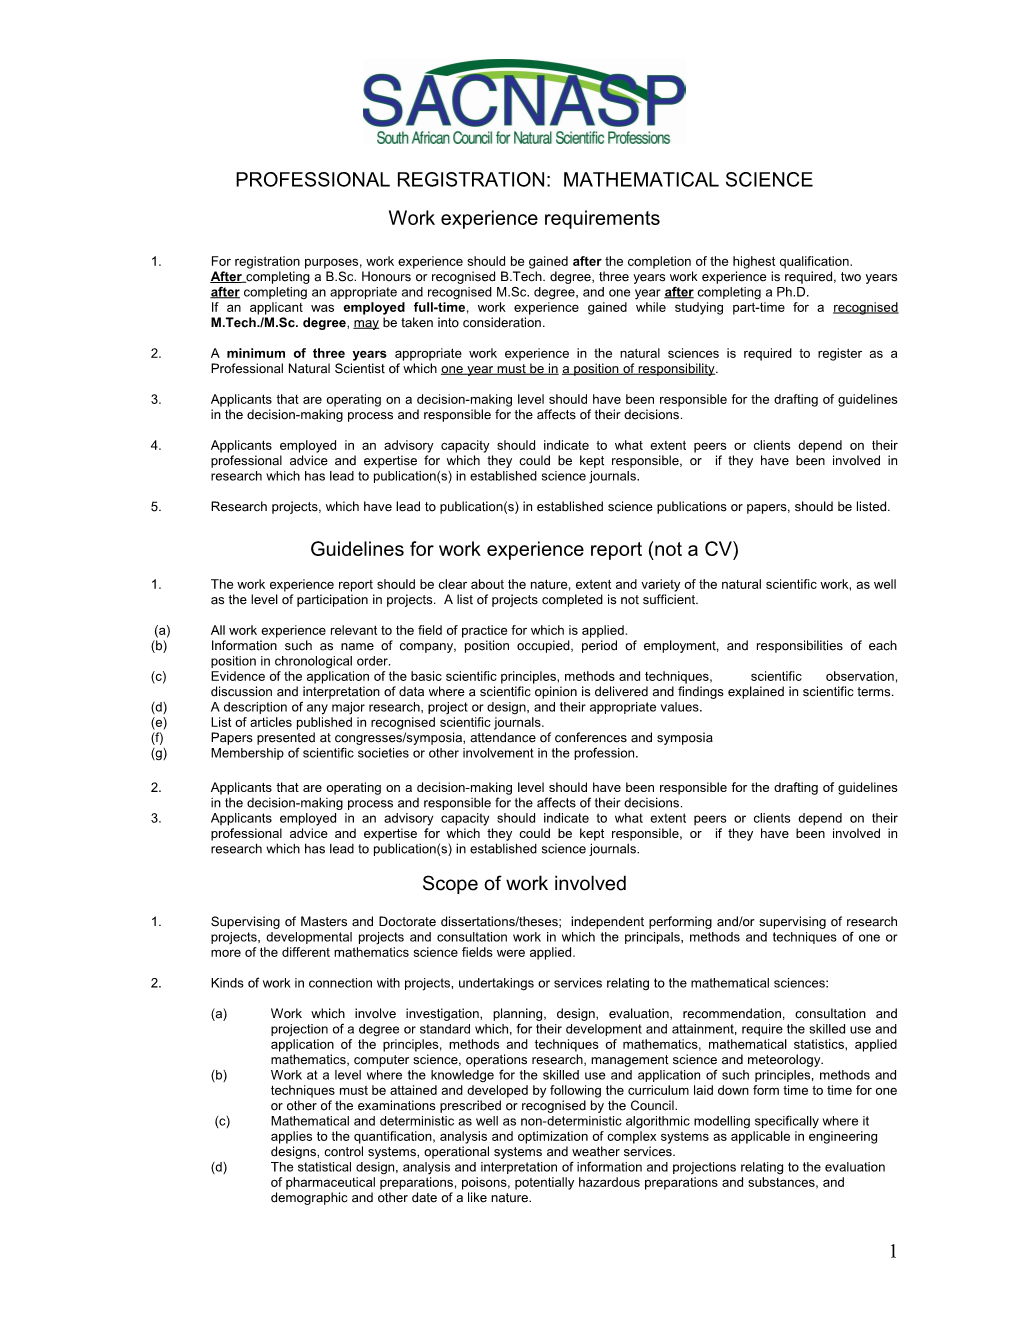 Professional Registration: Mathematical Science